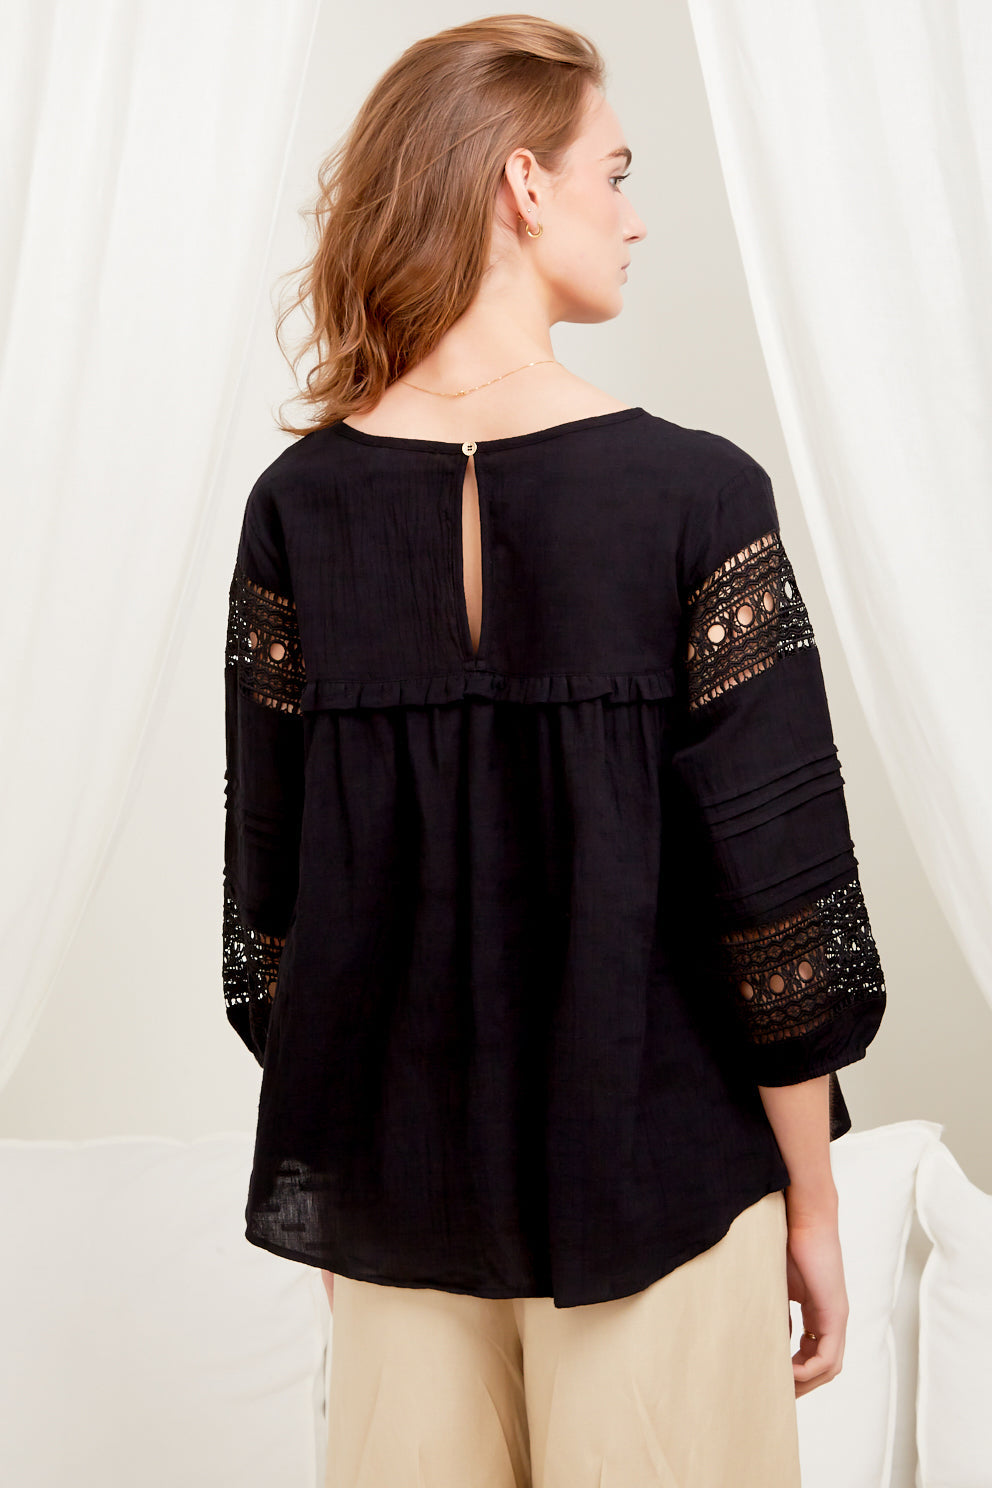 Susette Top - Buttoned Down Lace Insert Detailing Long Sleeve Top in Black